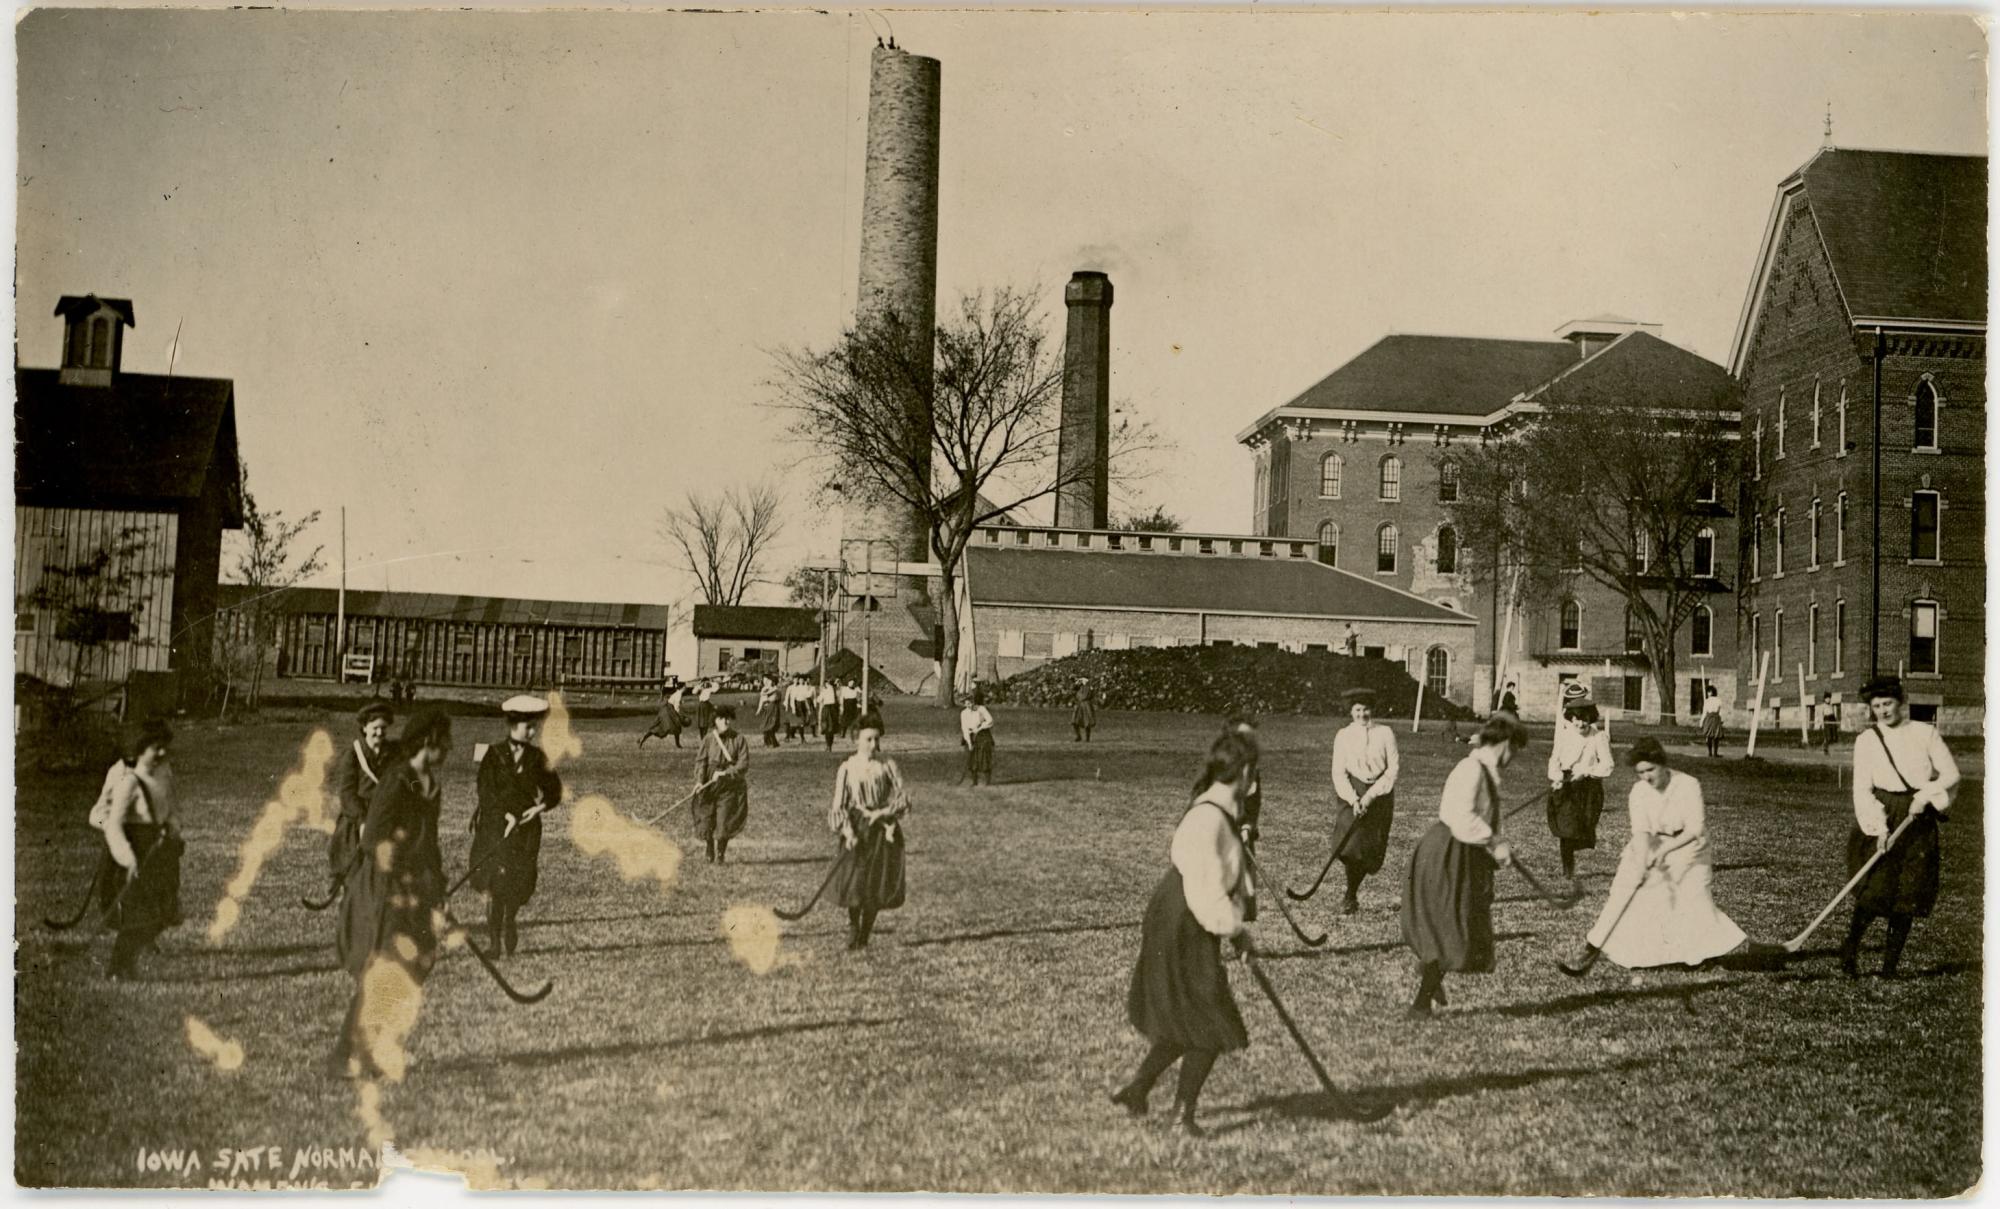 Field Hockey at UNI, 1901-1982 Special Collections and University Archives pic